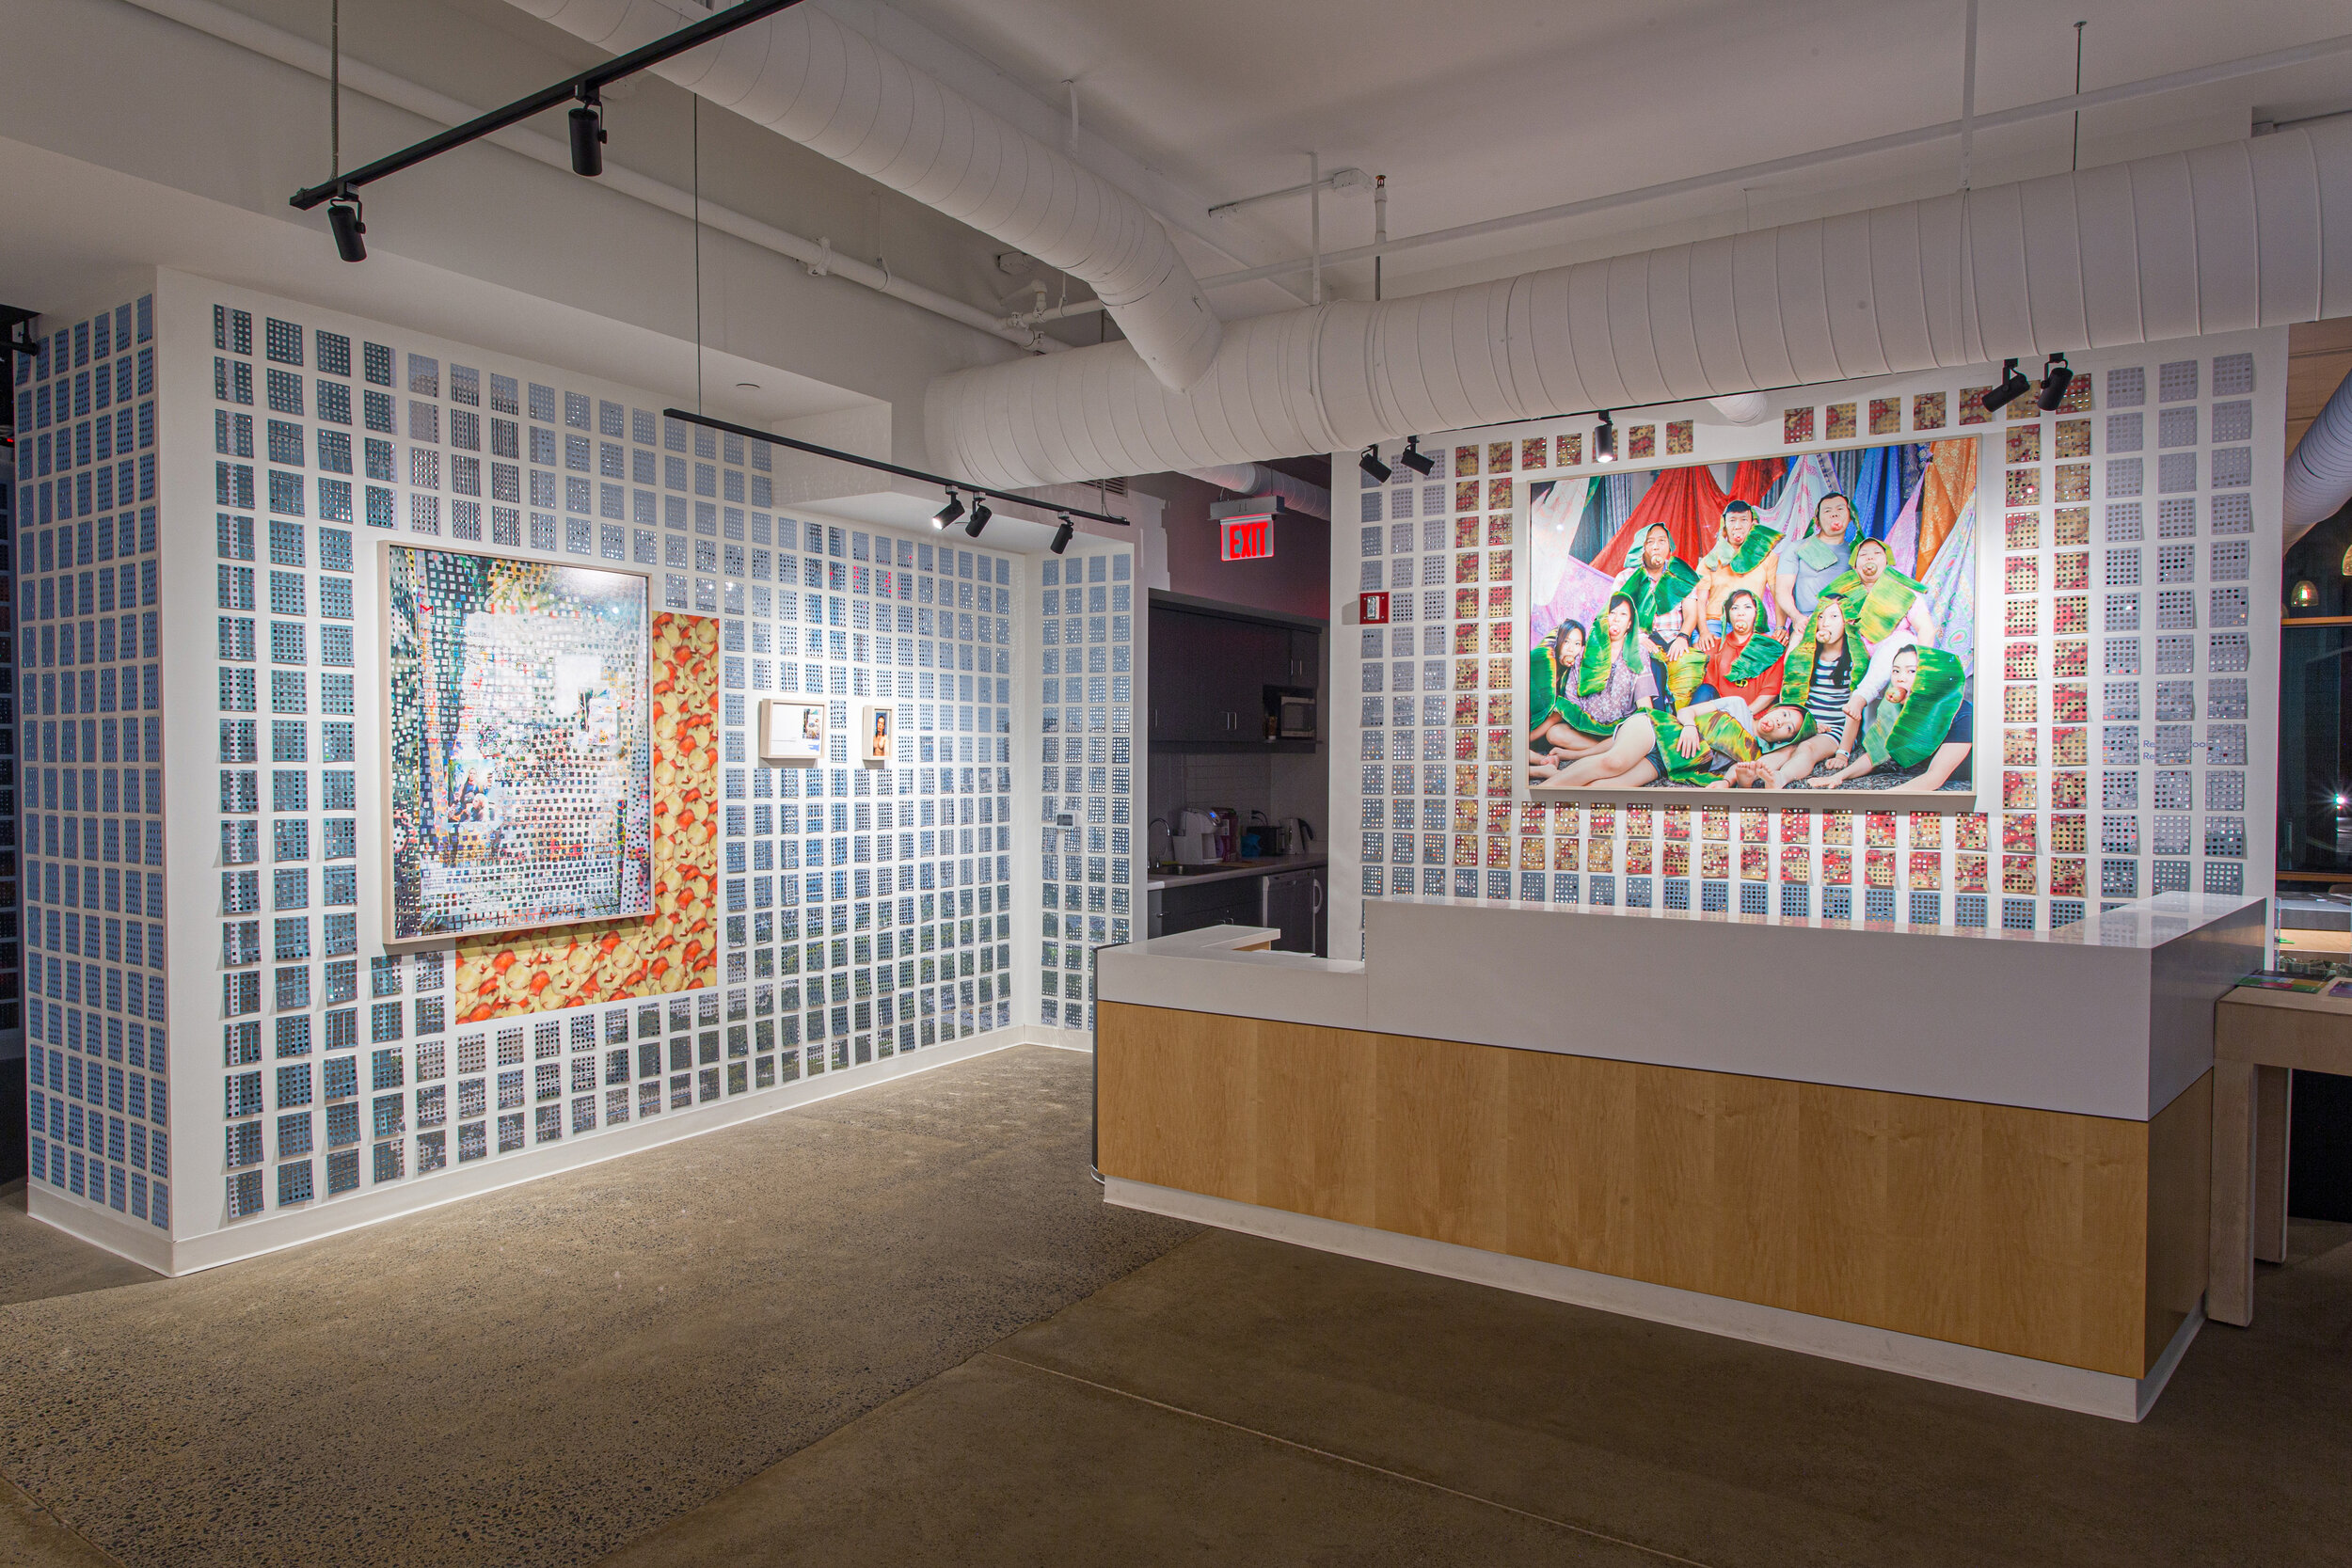 Installation View at Silver Eye Center for Photography, Pittsburgh, 2019